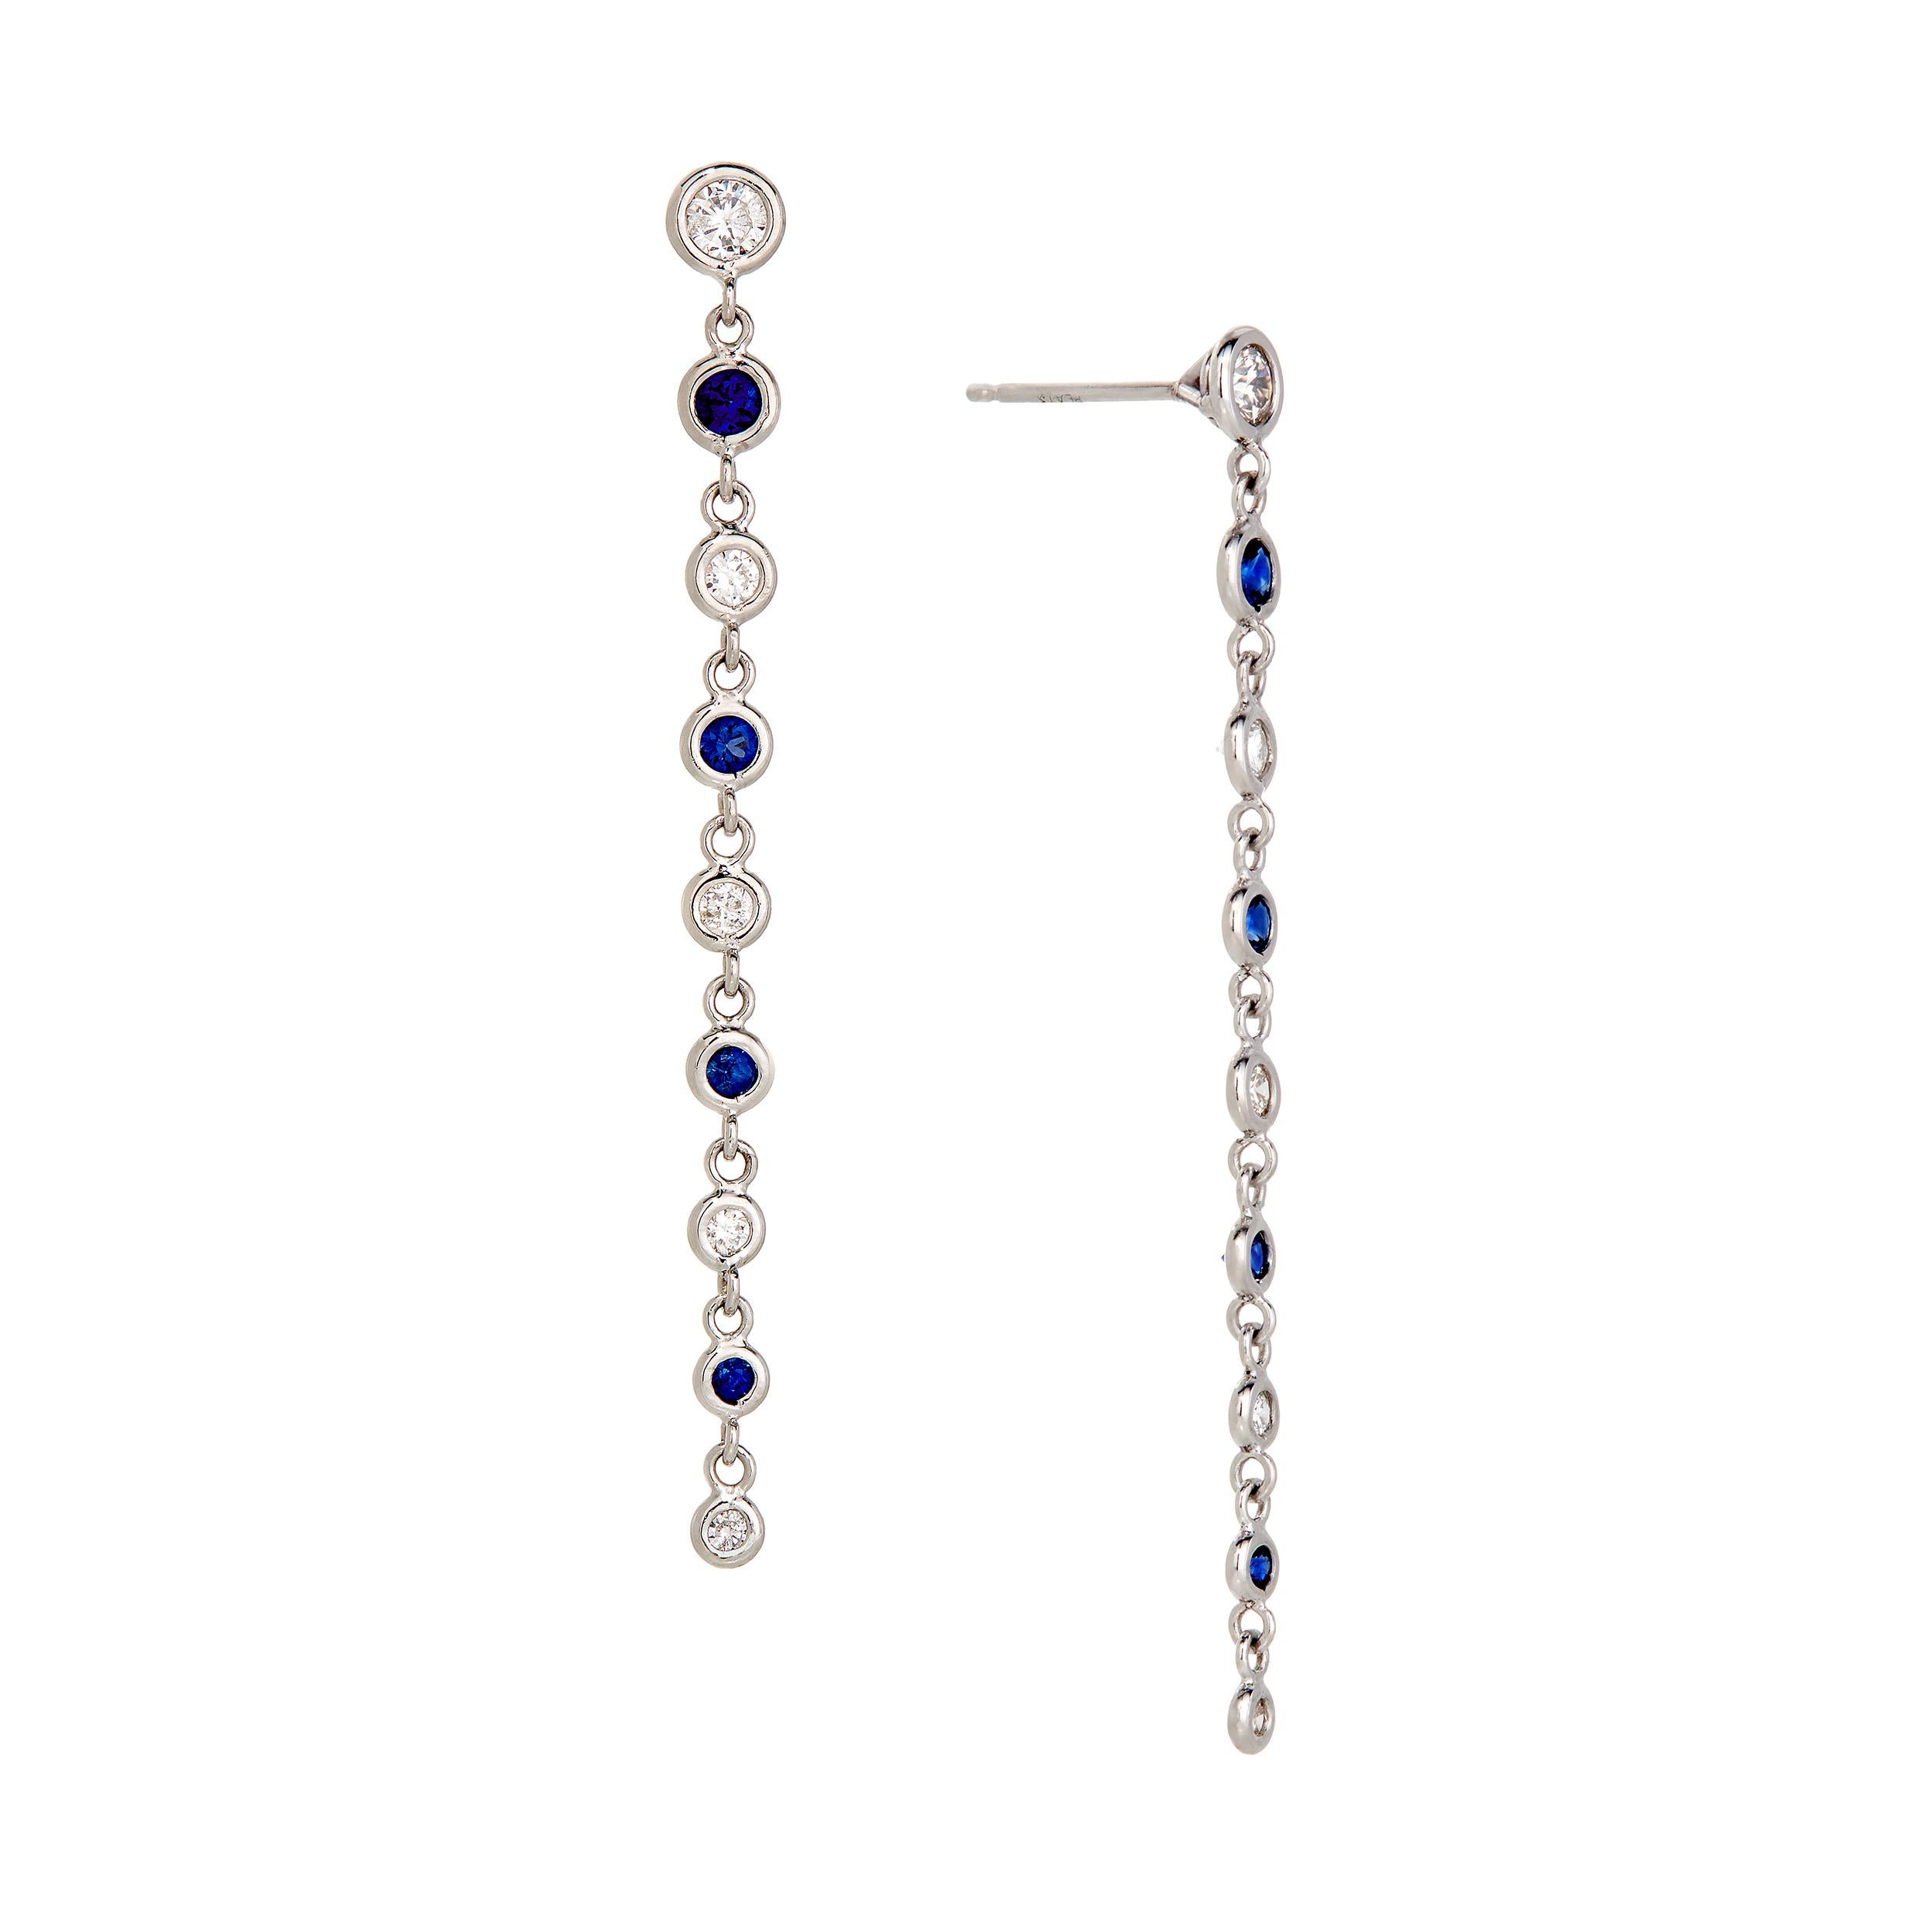 Gorgeous and striking! With movement between each diamond, these earrings flow effortlessly and delight with every wear, day to night. Light as a feather on the ear.

Earring Details:

Total Diamond (10 count) Weight: 0.90 Carats
Total Sapphire (8